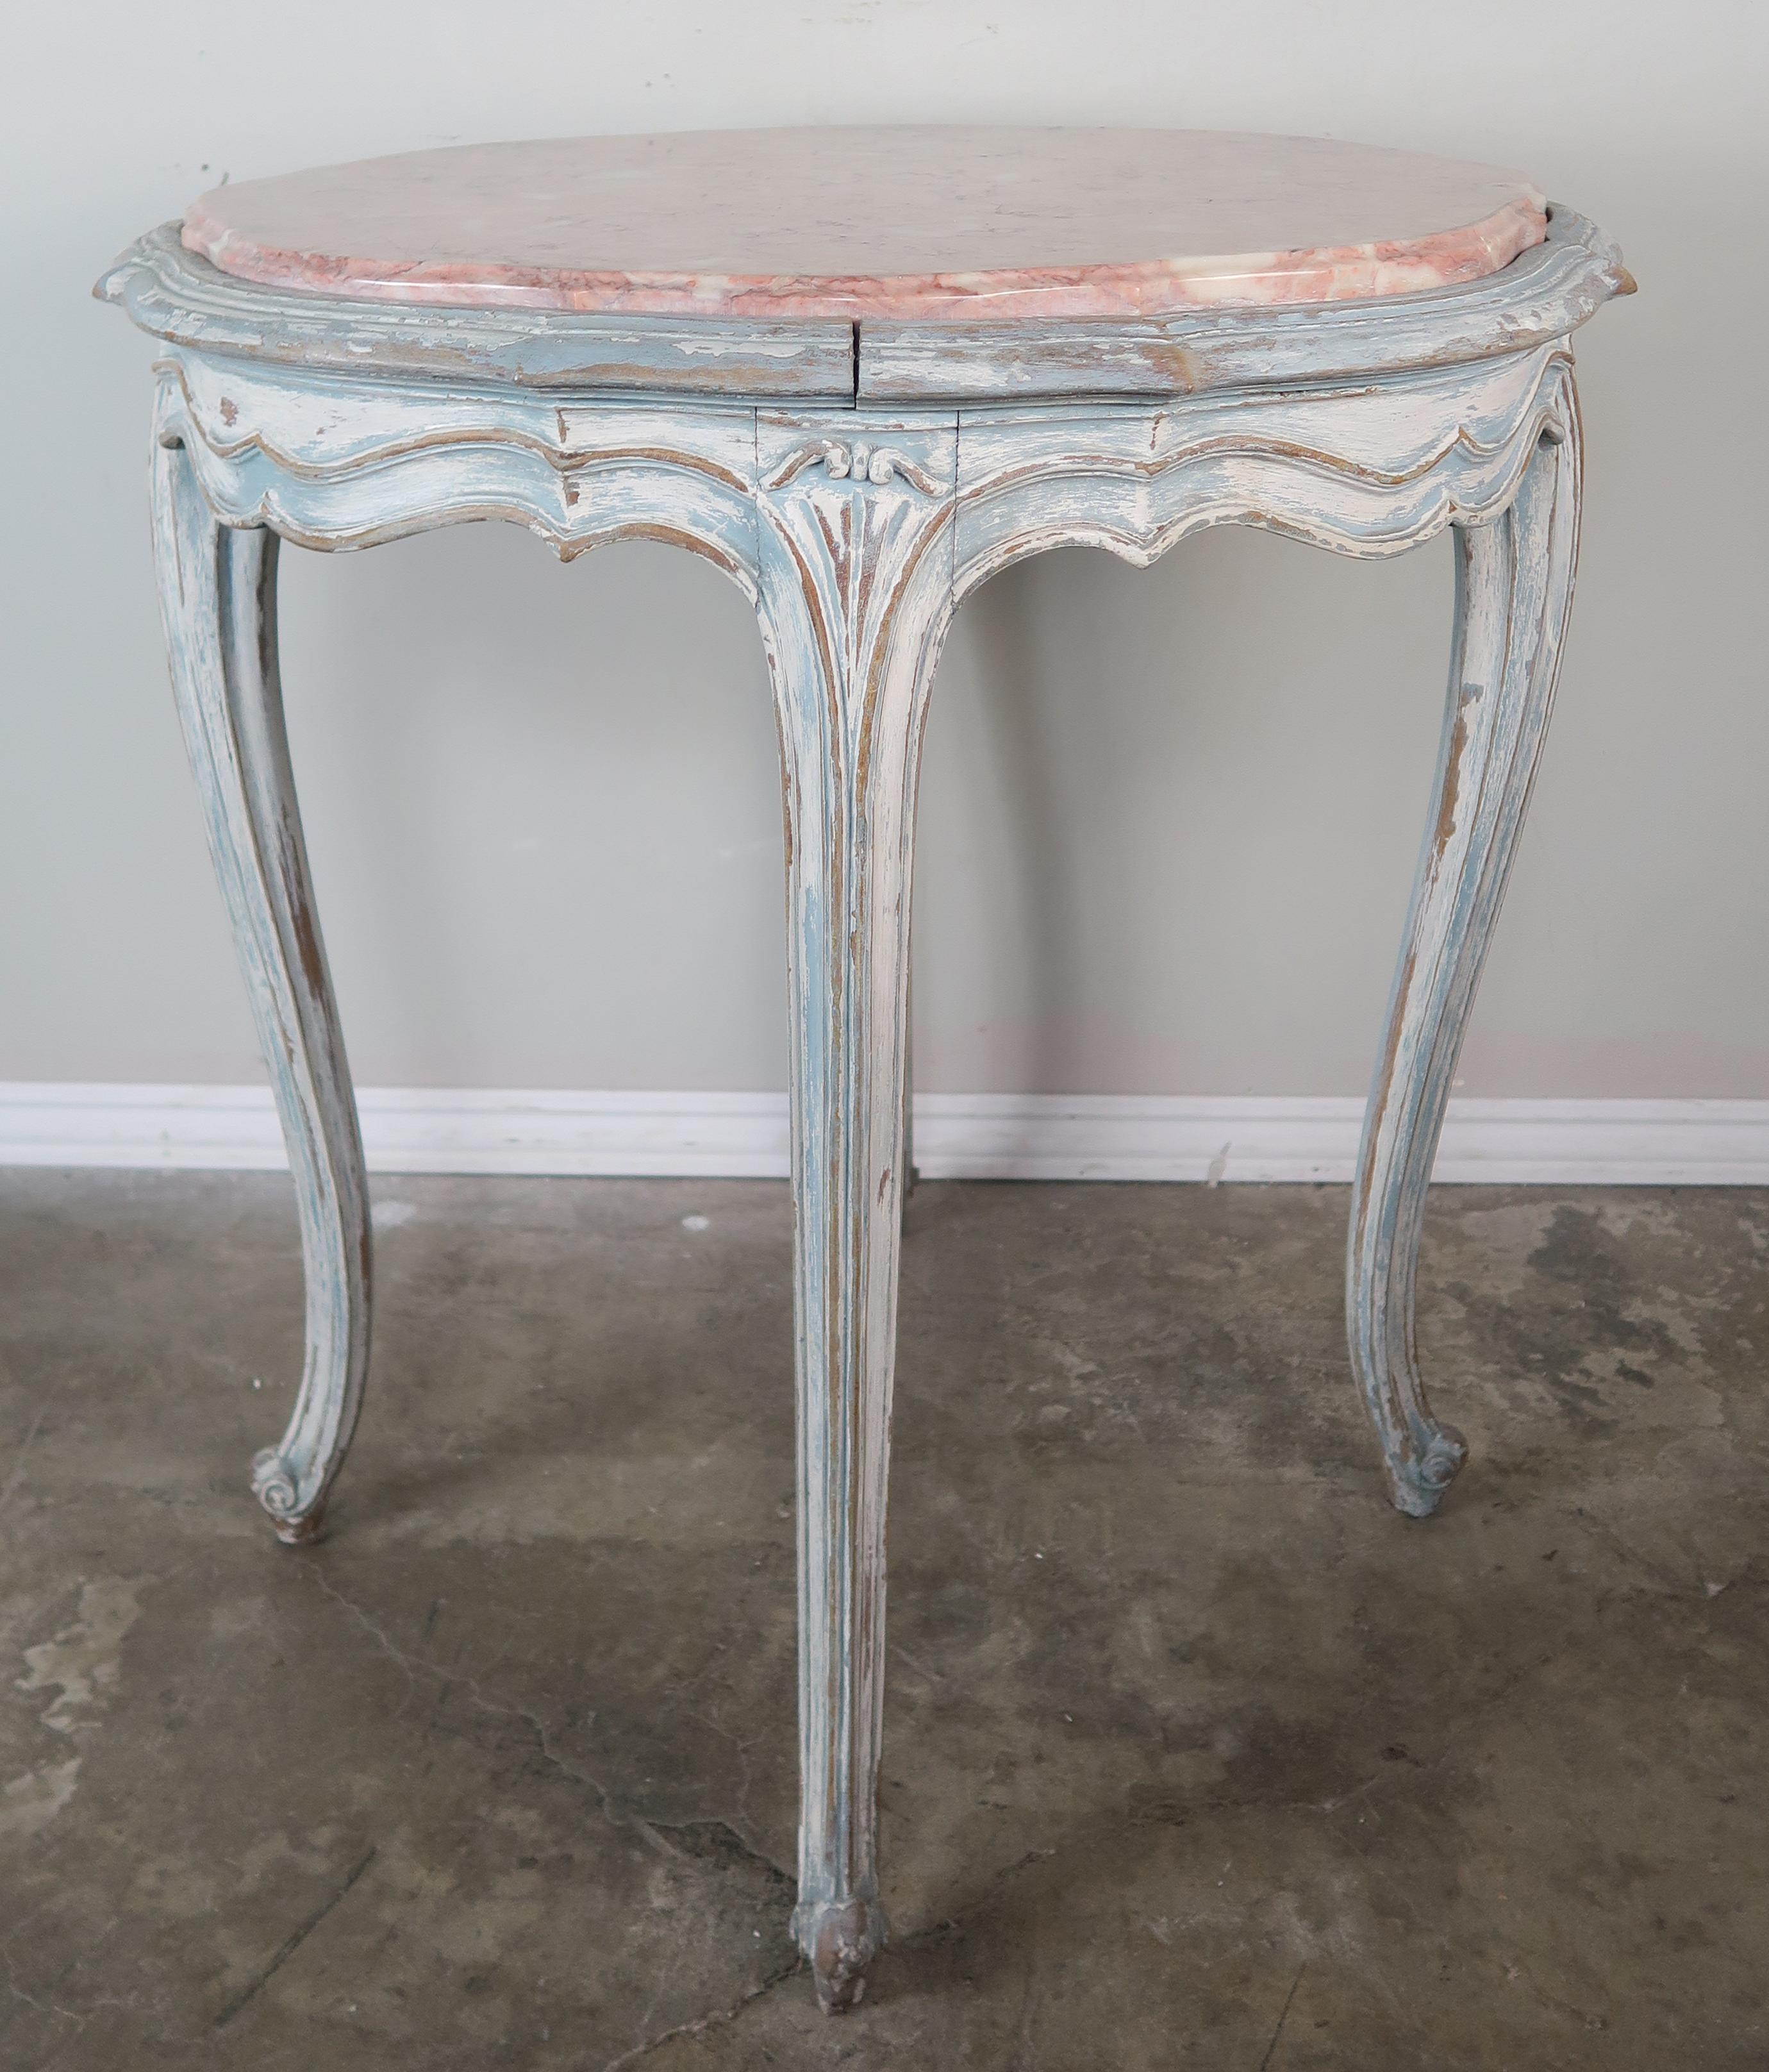 Hand-Painted Pair of French Louis XV Style Painted Tables with Marble Tops